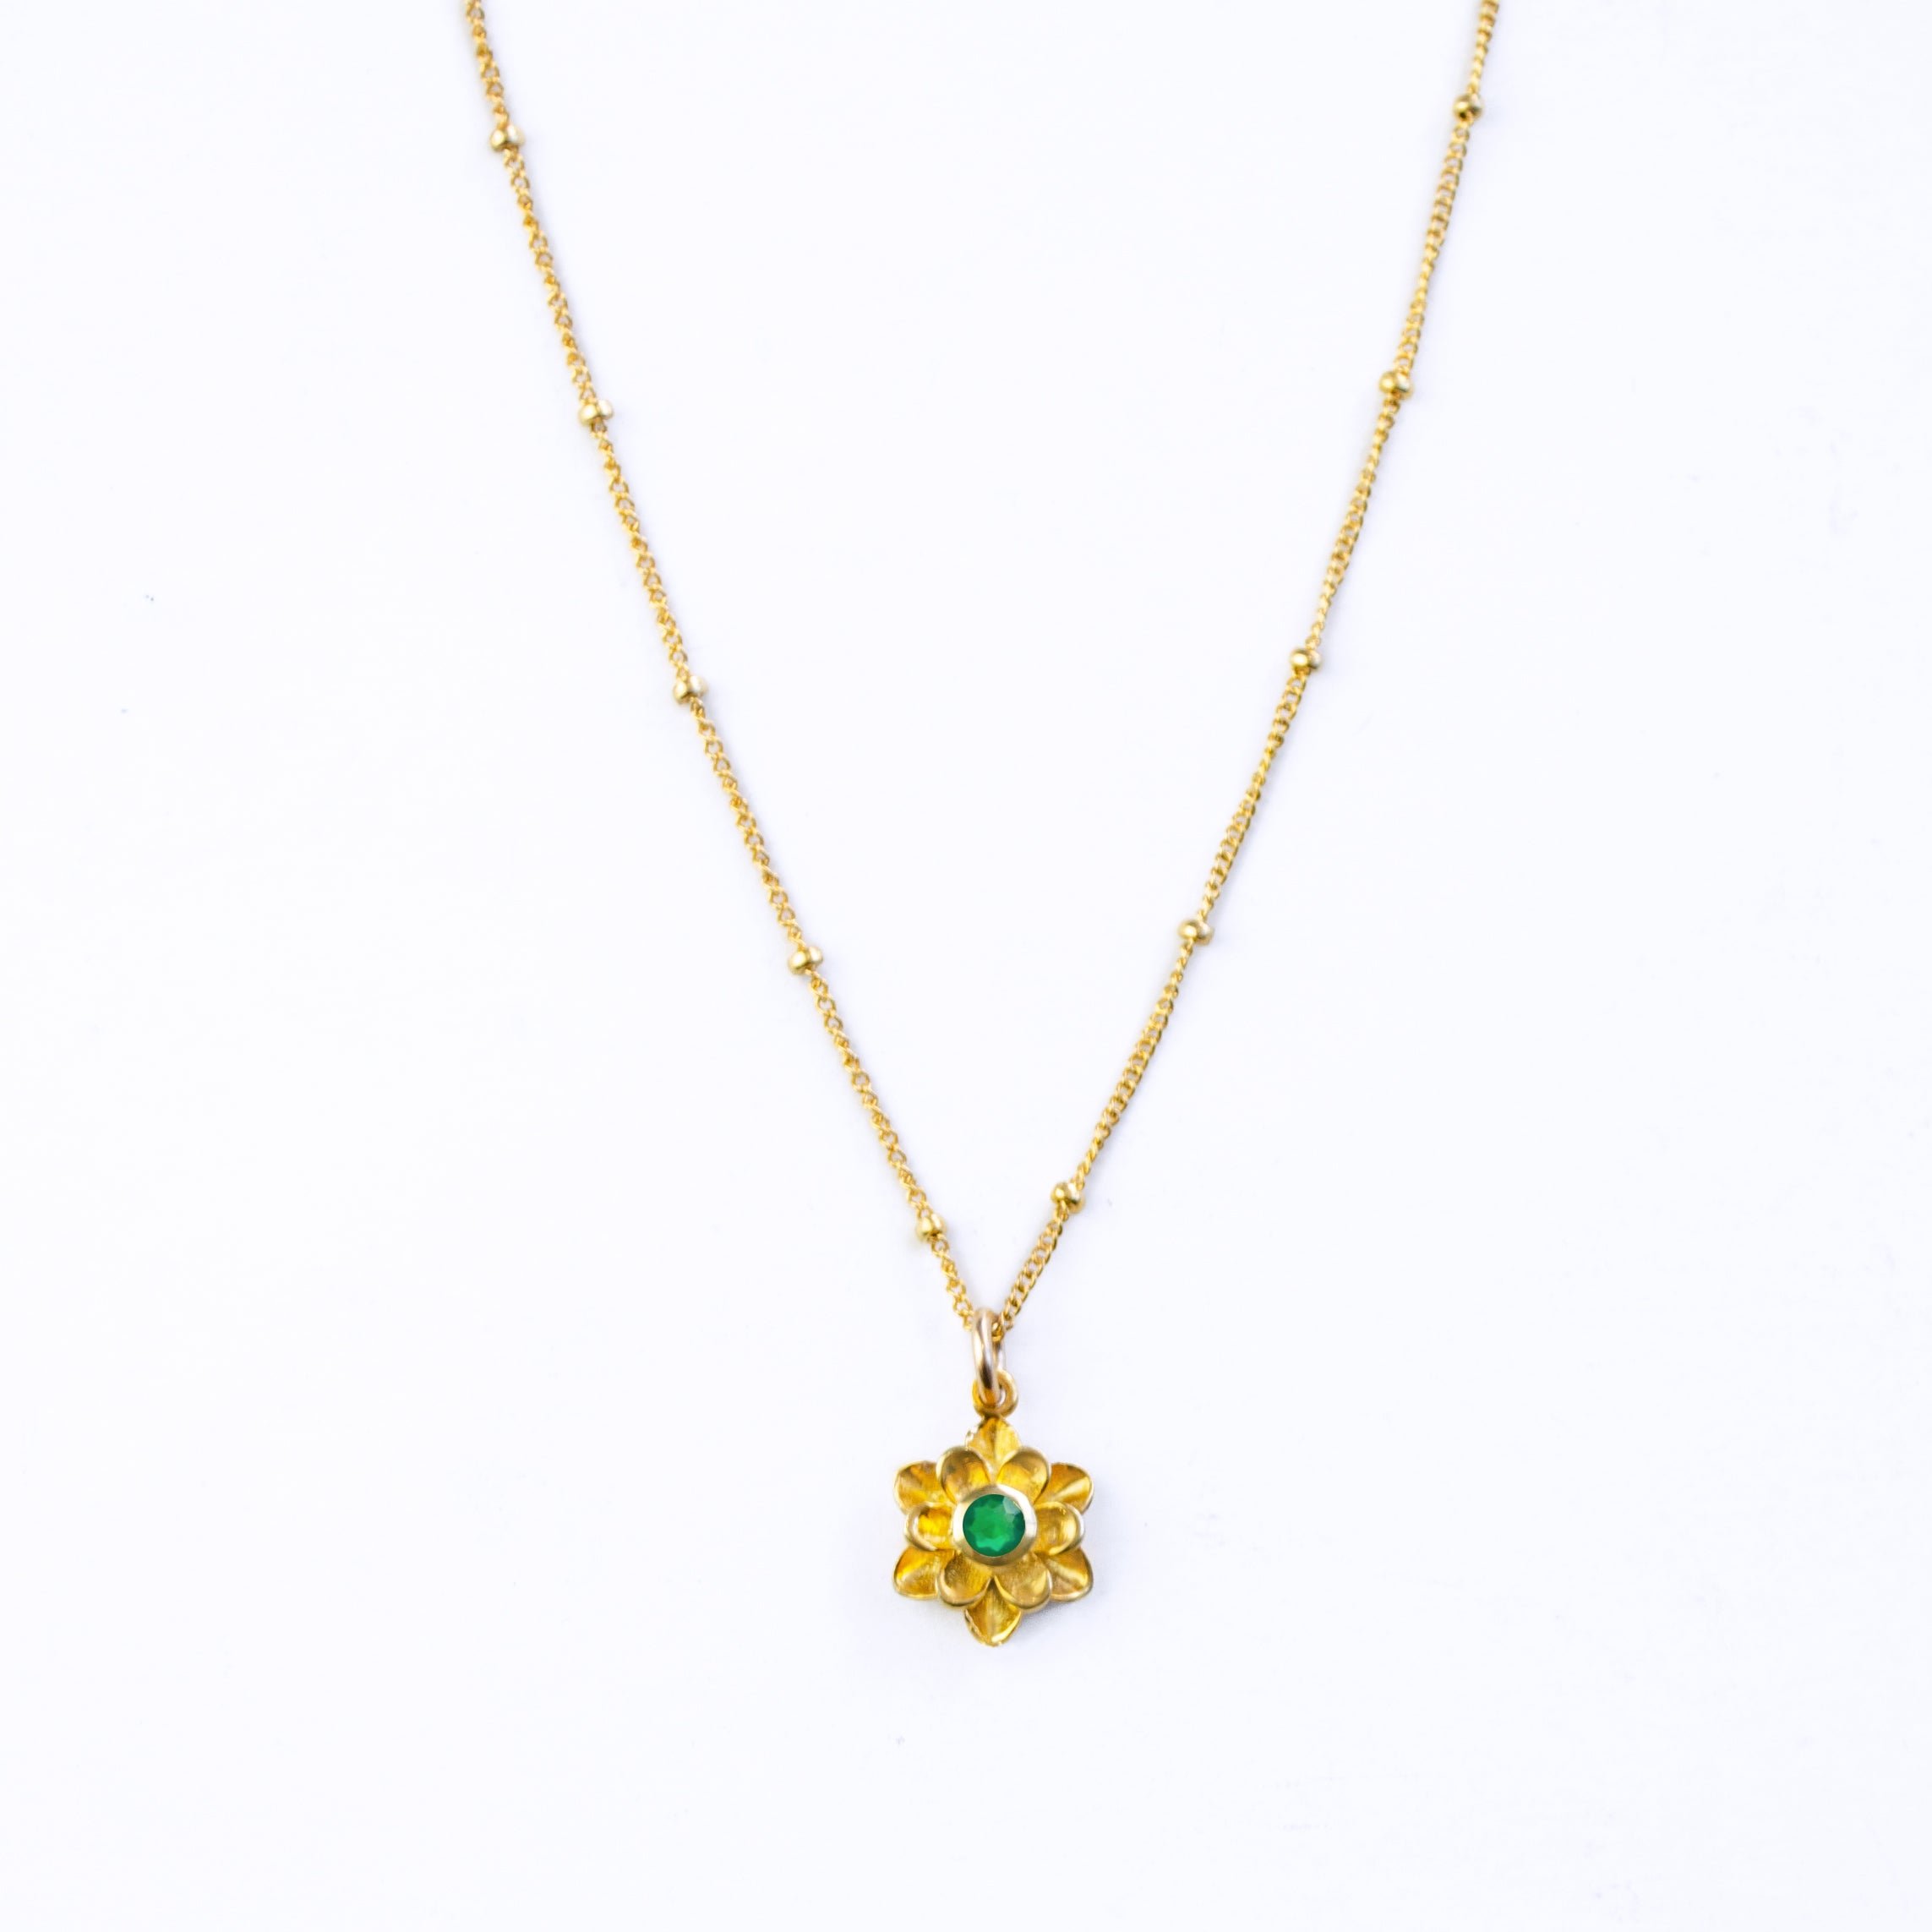 Personalized Mother Daughter Bloom Necklace Set, Birthstone Blossom Pendant [Bloom]